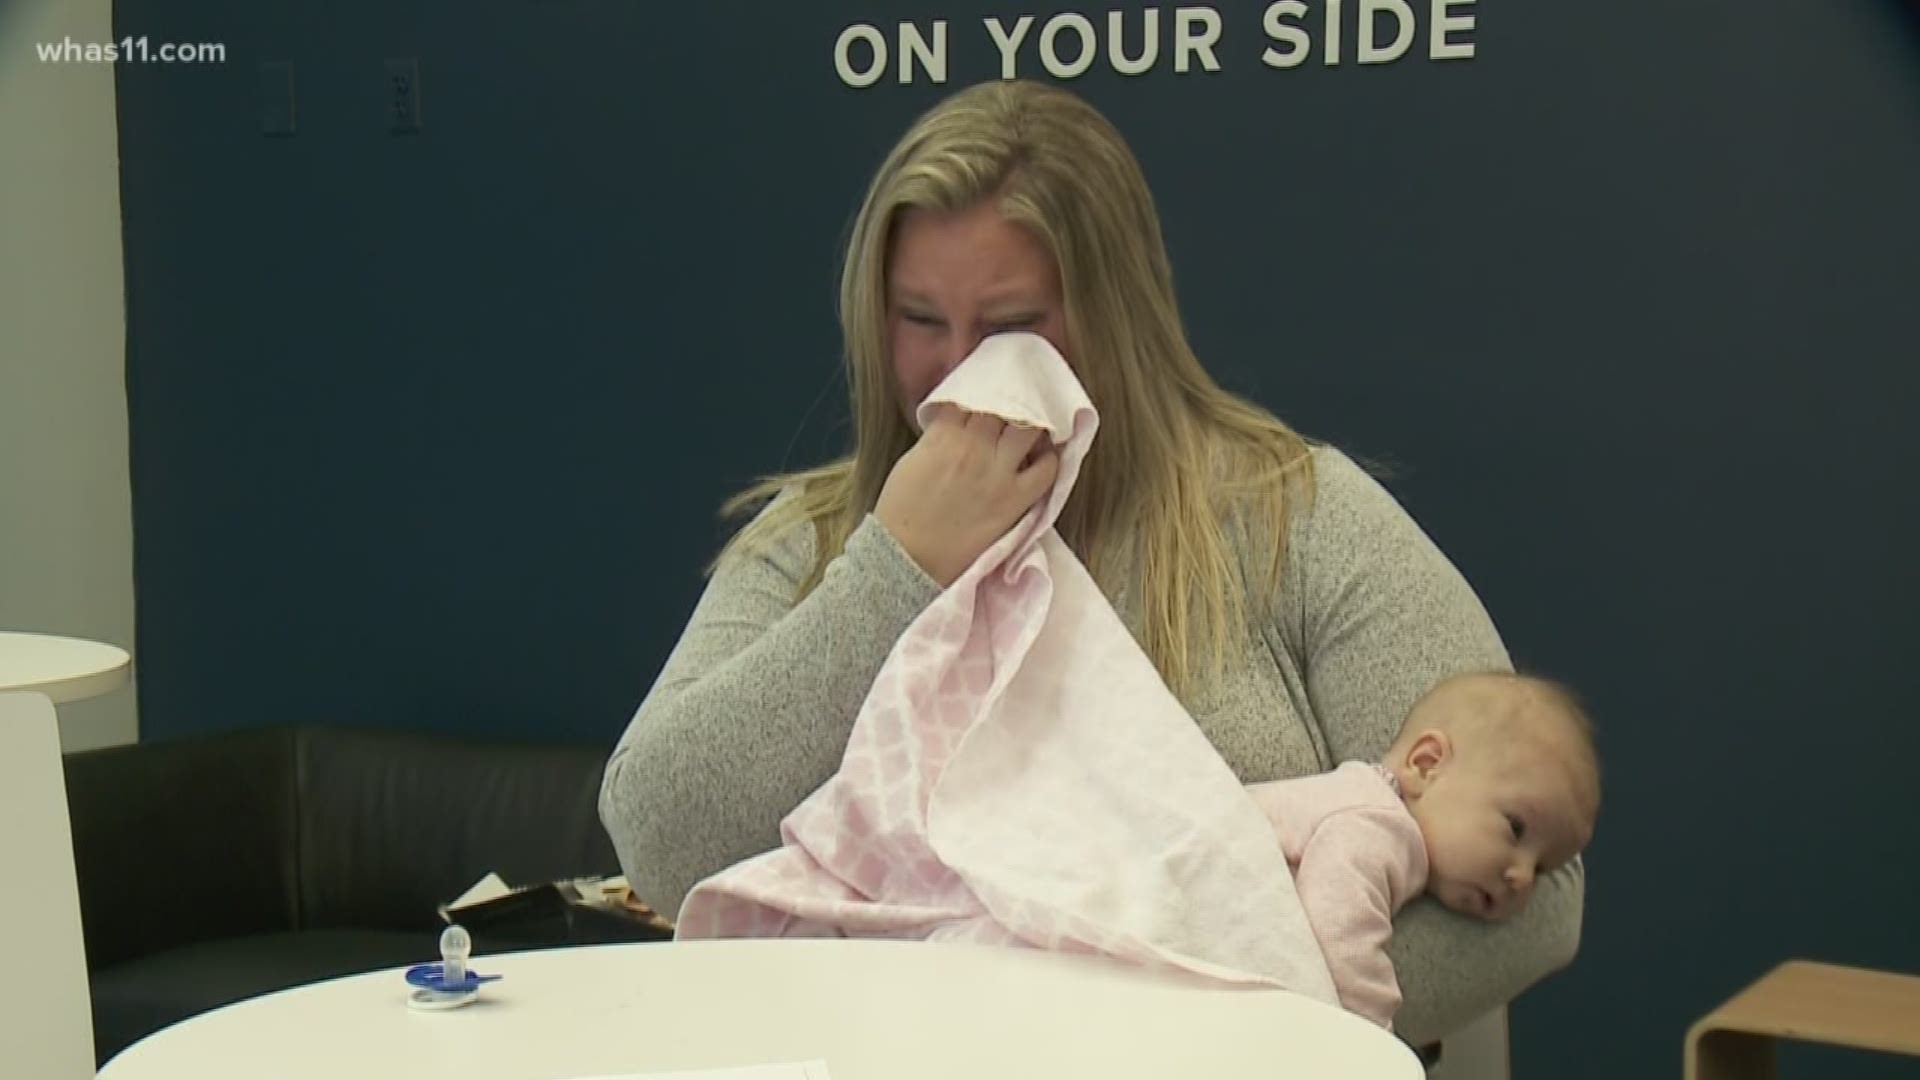 A Louisville mother who is now suing Texas Roadhouse after she says she was embarrassed and humiliated for breastfeeding.